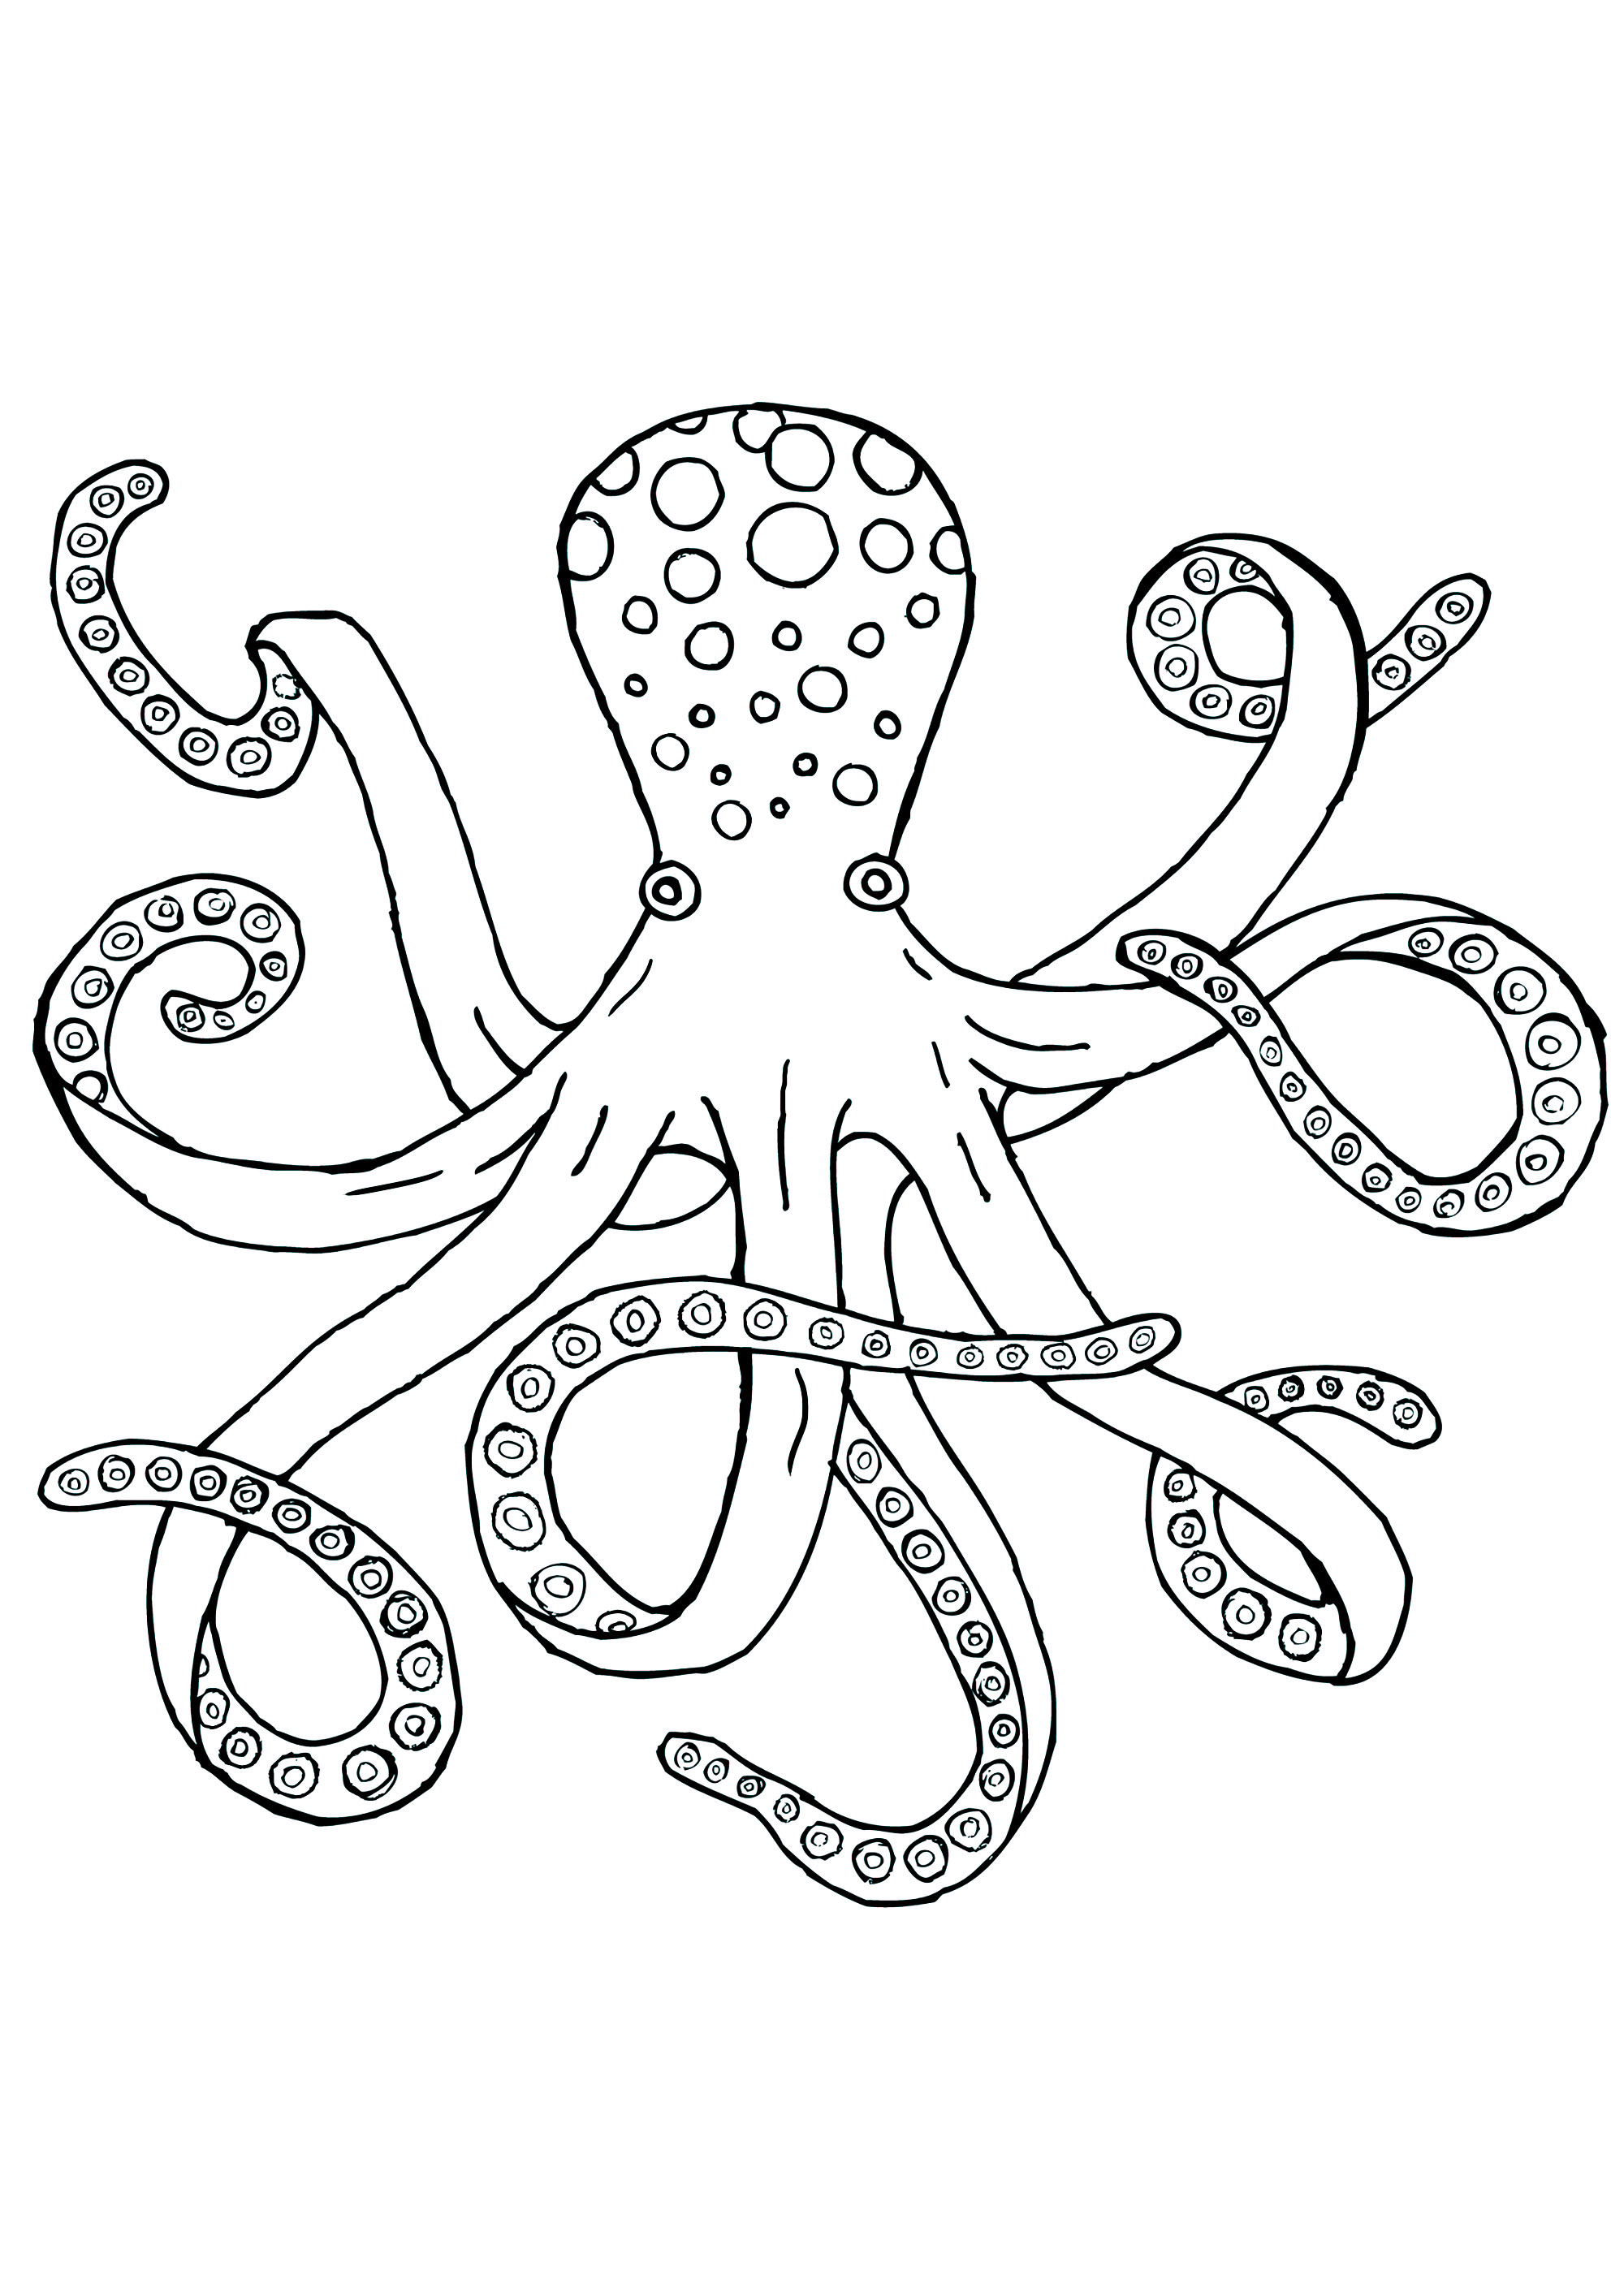 Octopuses to download - Octopuses Kids Coloring Pages